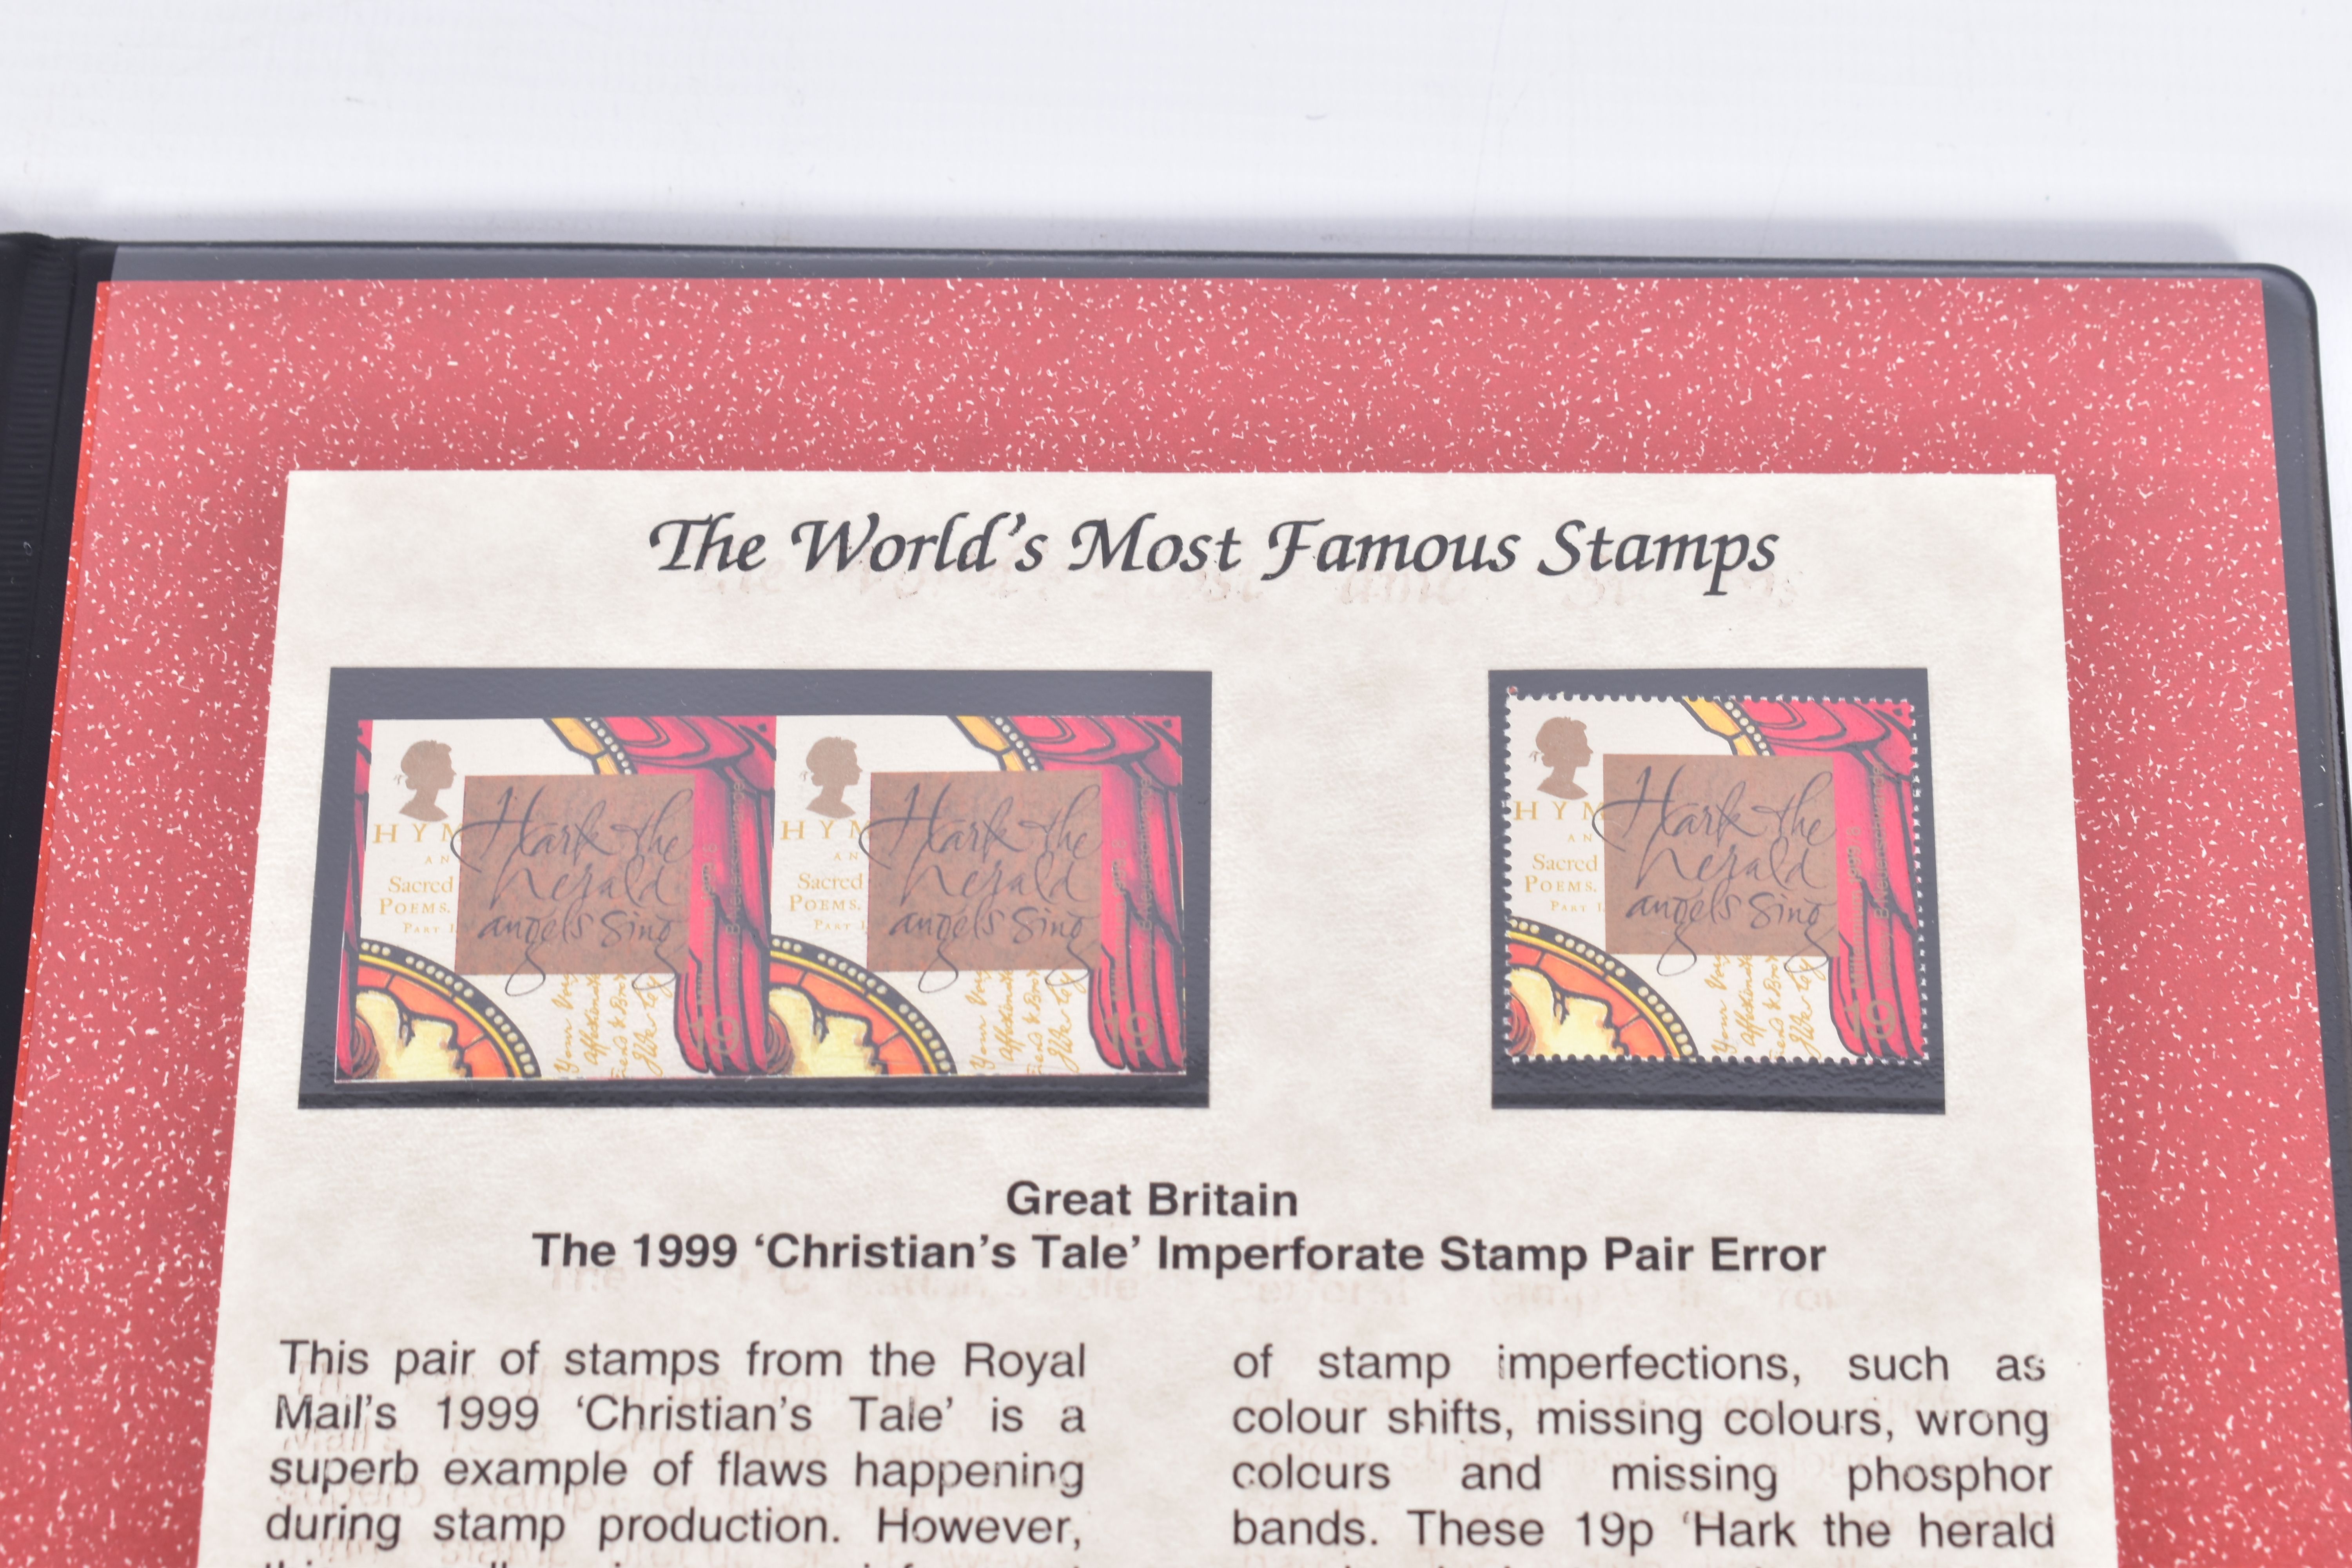 GB 1999 CHRISTIANS TALE 19p IMPERFECT PAIR SG 2115a, fine MNH in Westminster folder, supplied with - Image 4 of 4